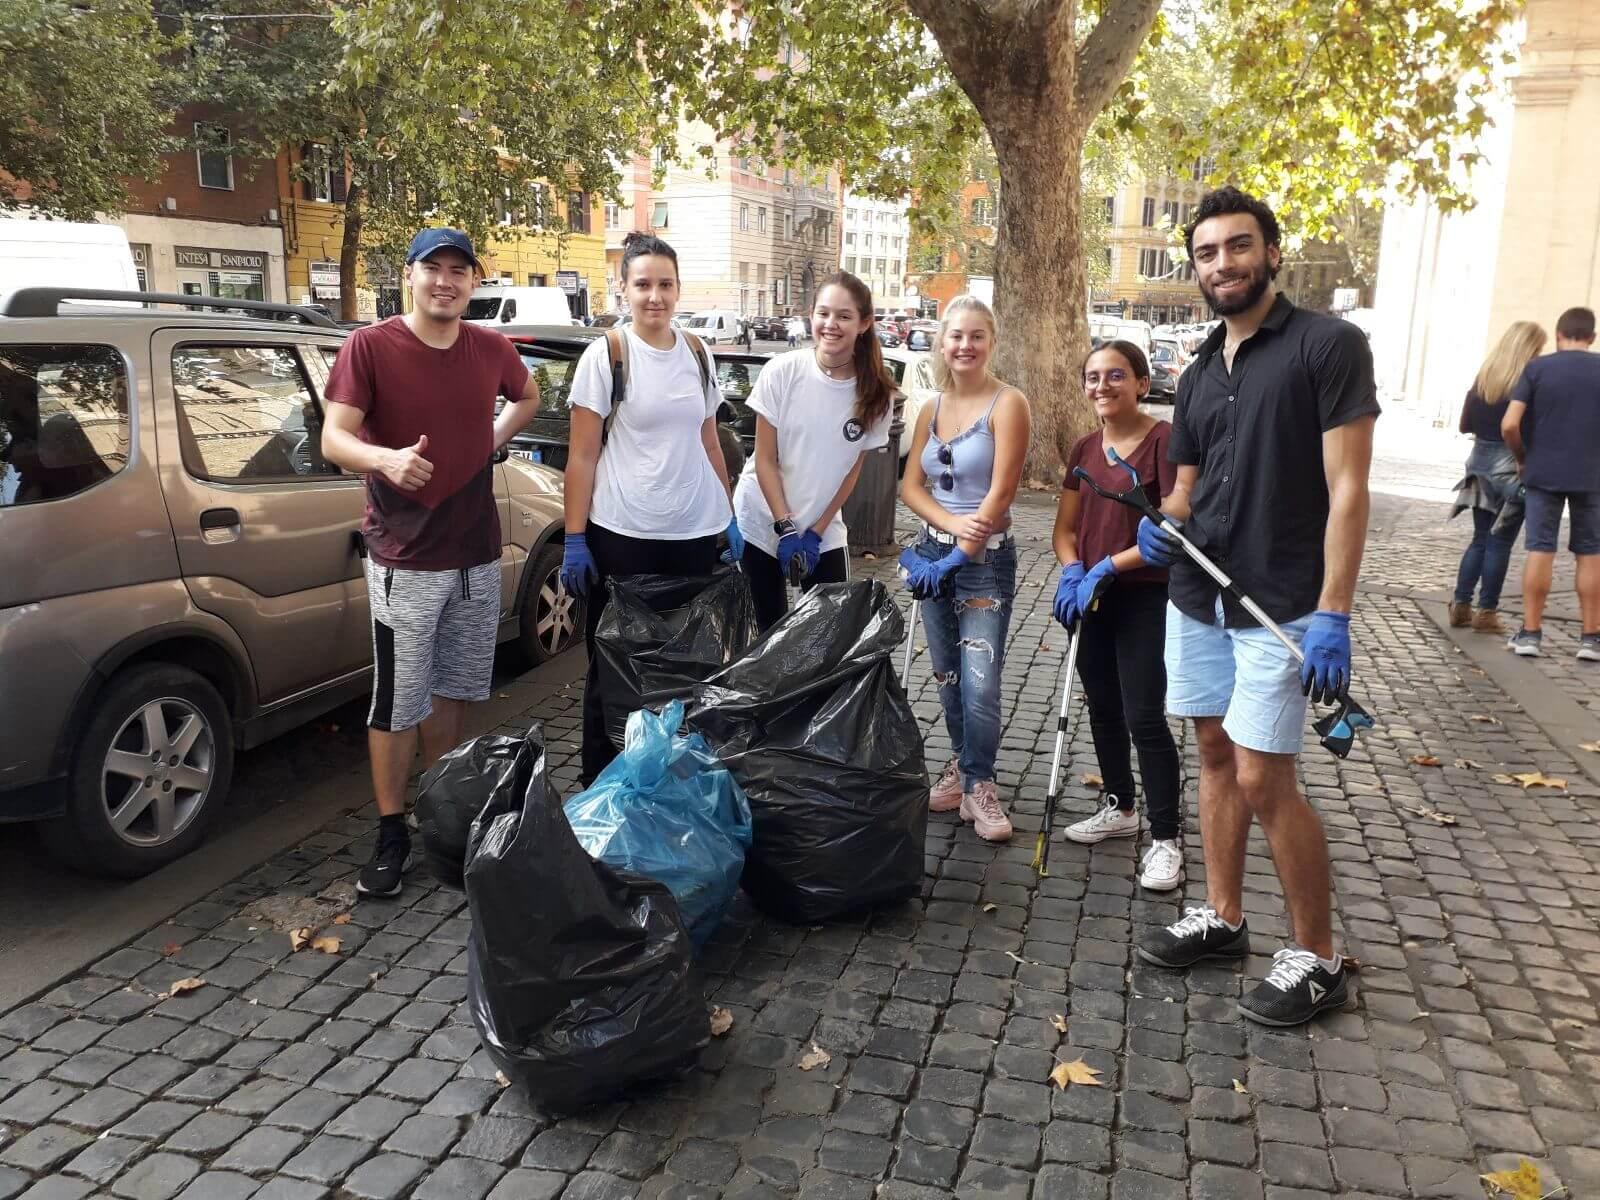 Students of our university in Rome engaged in a community cleaning initiative